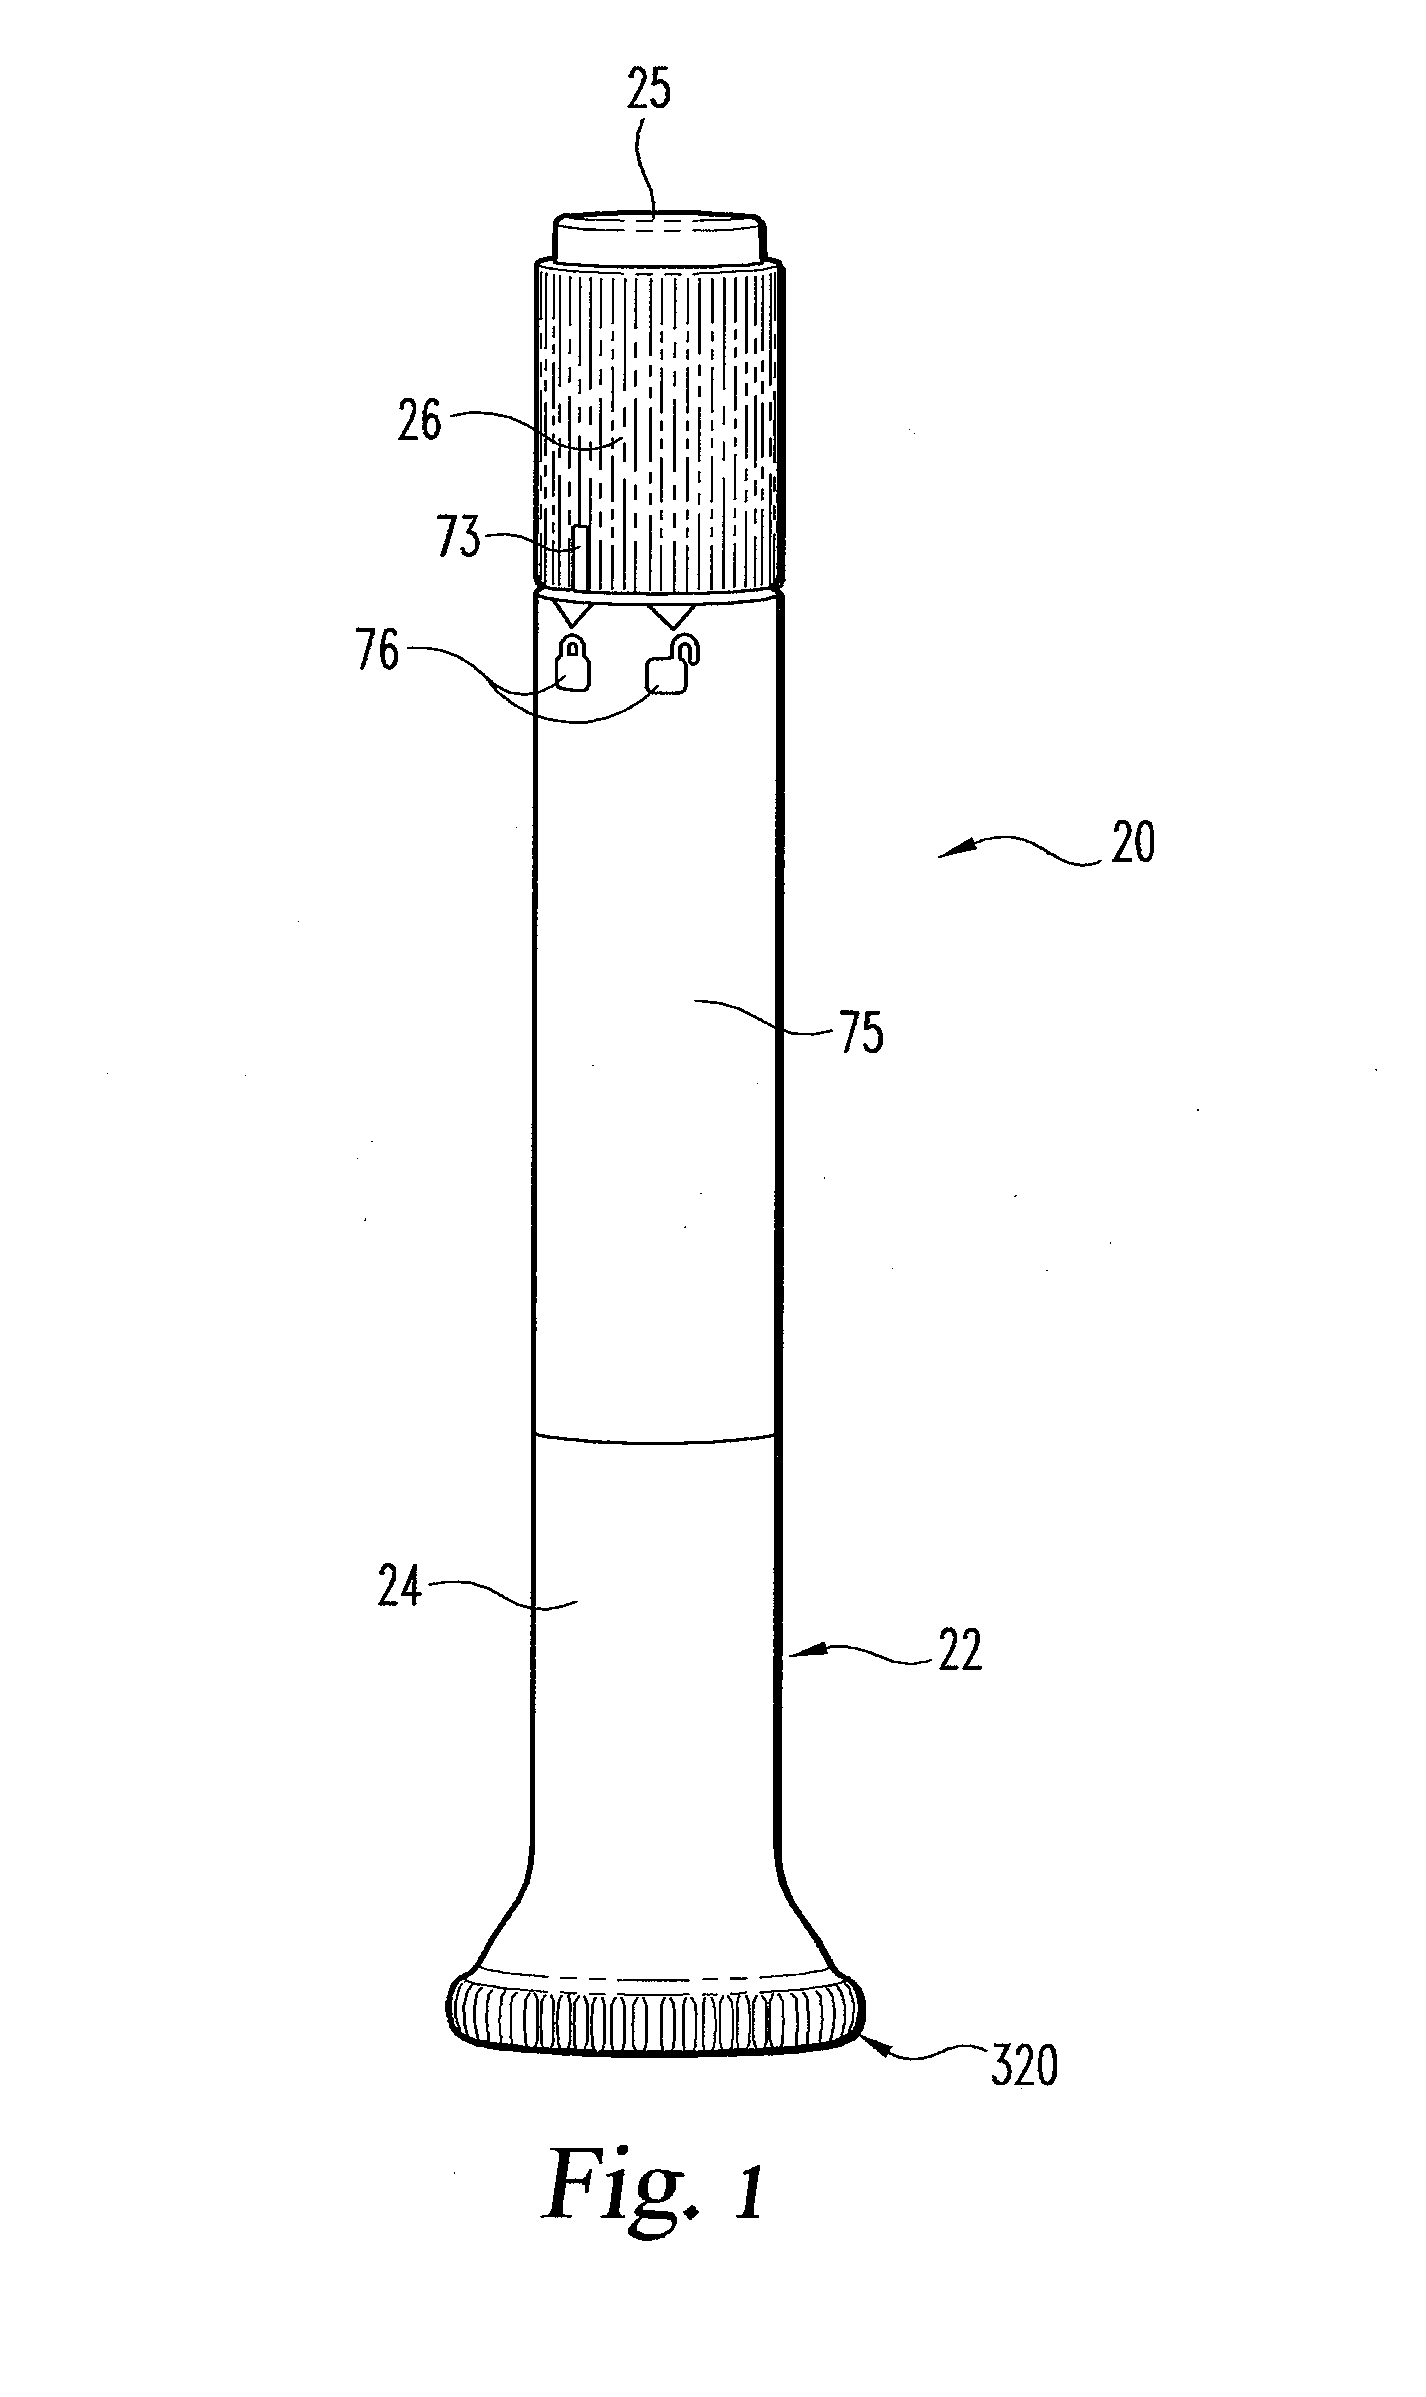 Automatic Injection Device With Delay Mechanism Including Dual Functioning Biasing Member